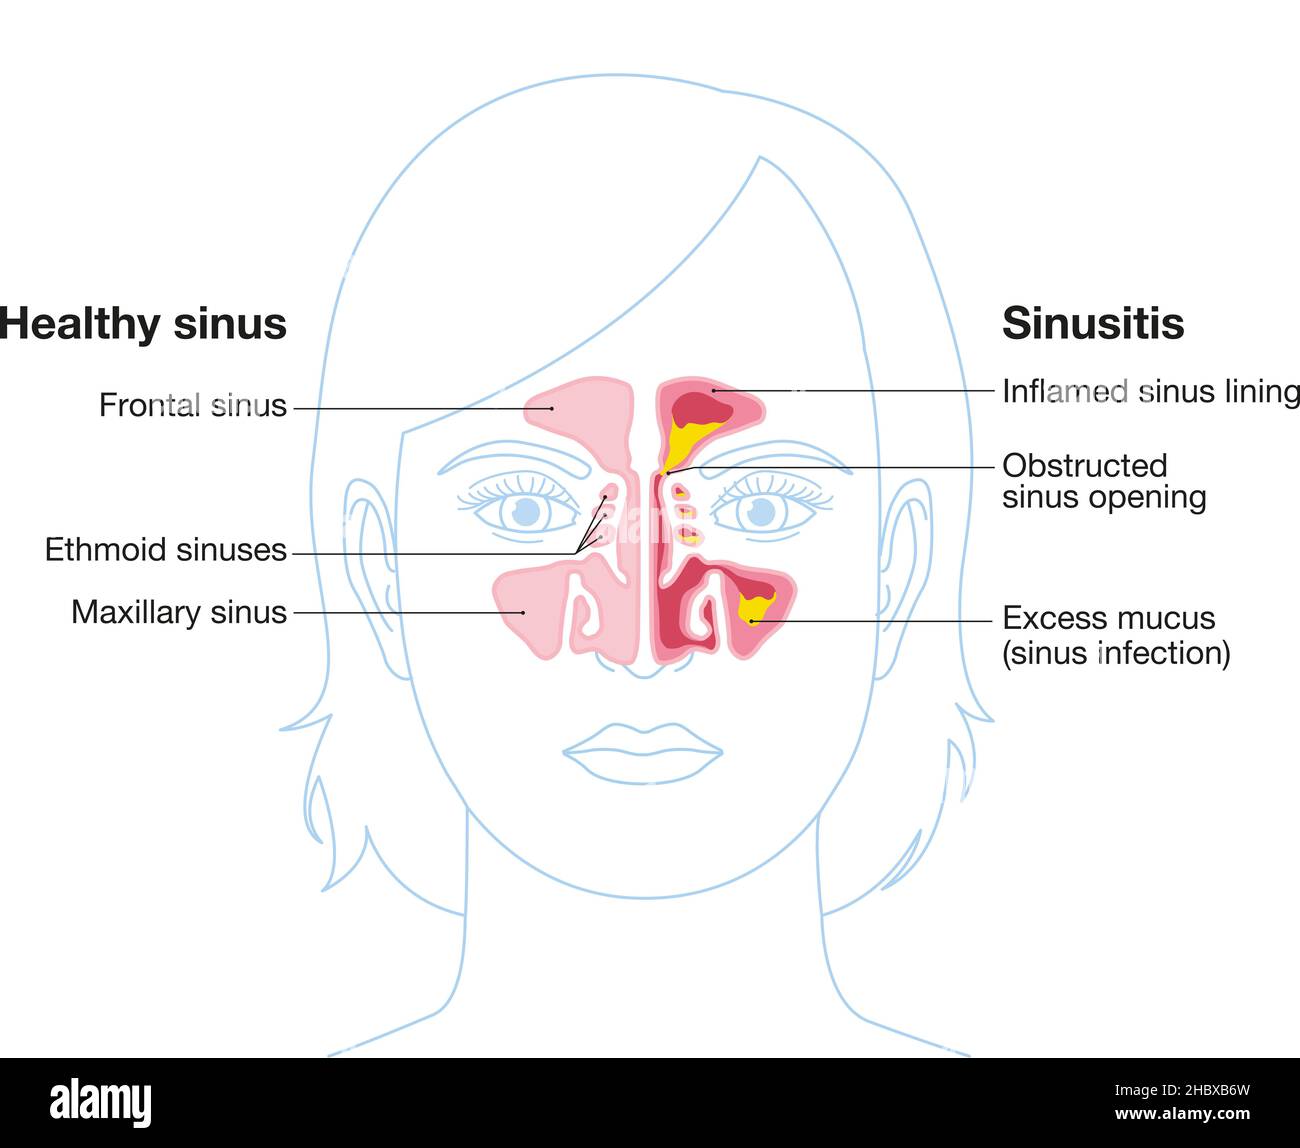 Vector illustration showing healthy sinus and sinusitis with inflamed lining, obstructed sinus opening, adenoid and excess mucus Stock Photo